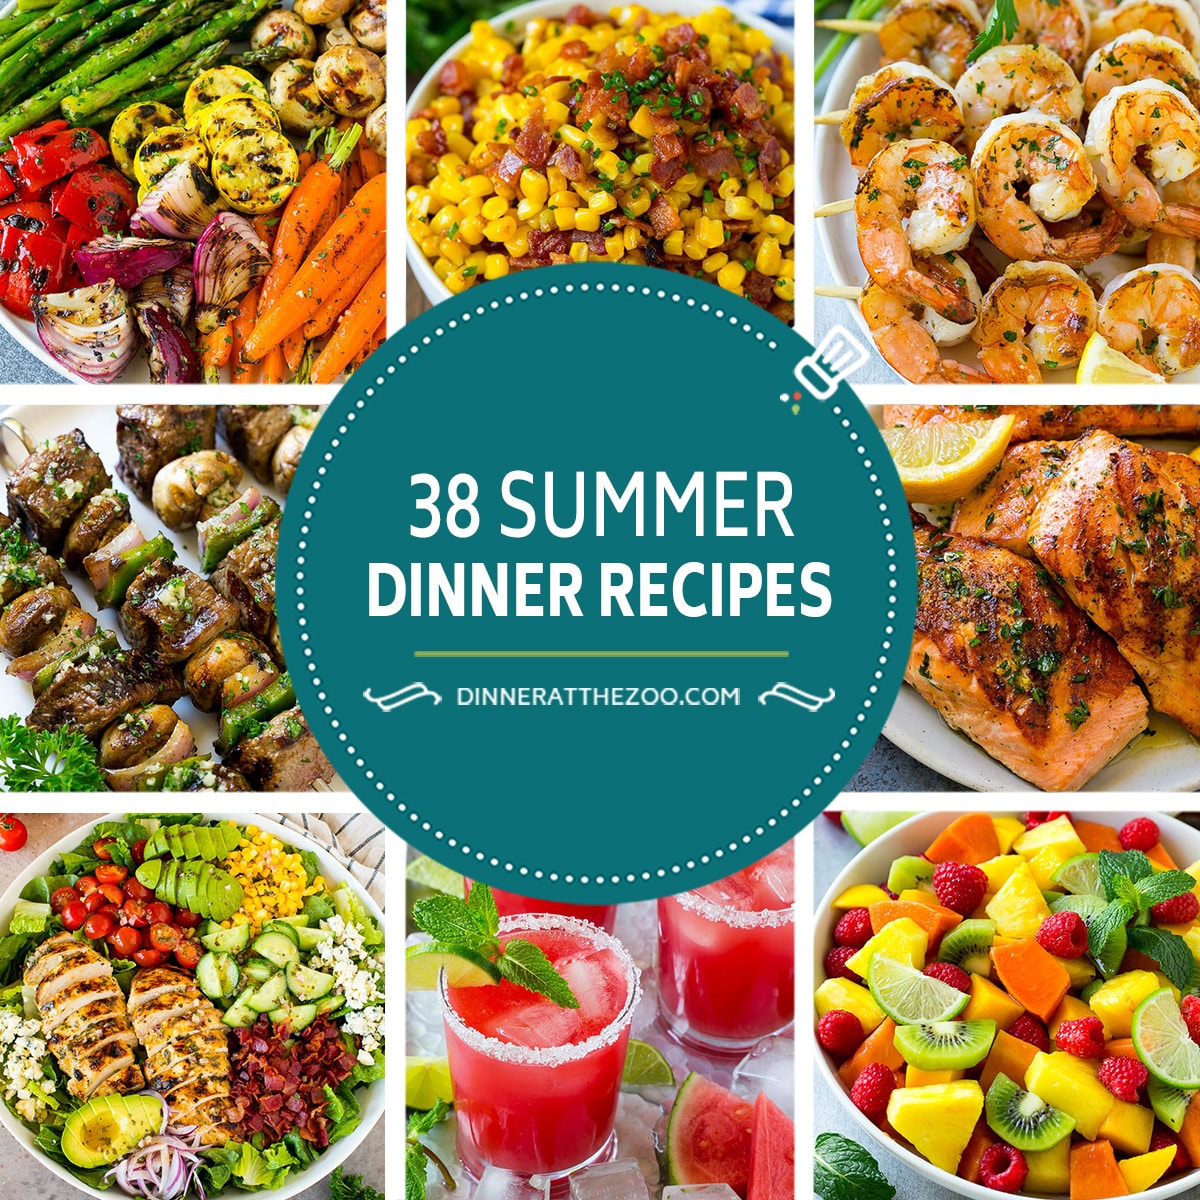 A collection of summer dinner recipes including grilled meats, kabobs, side dishes and drinks.